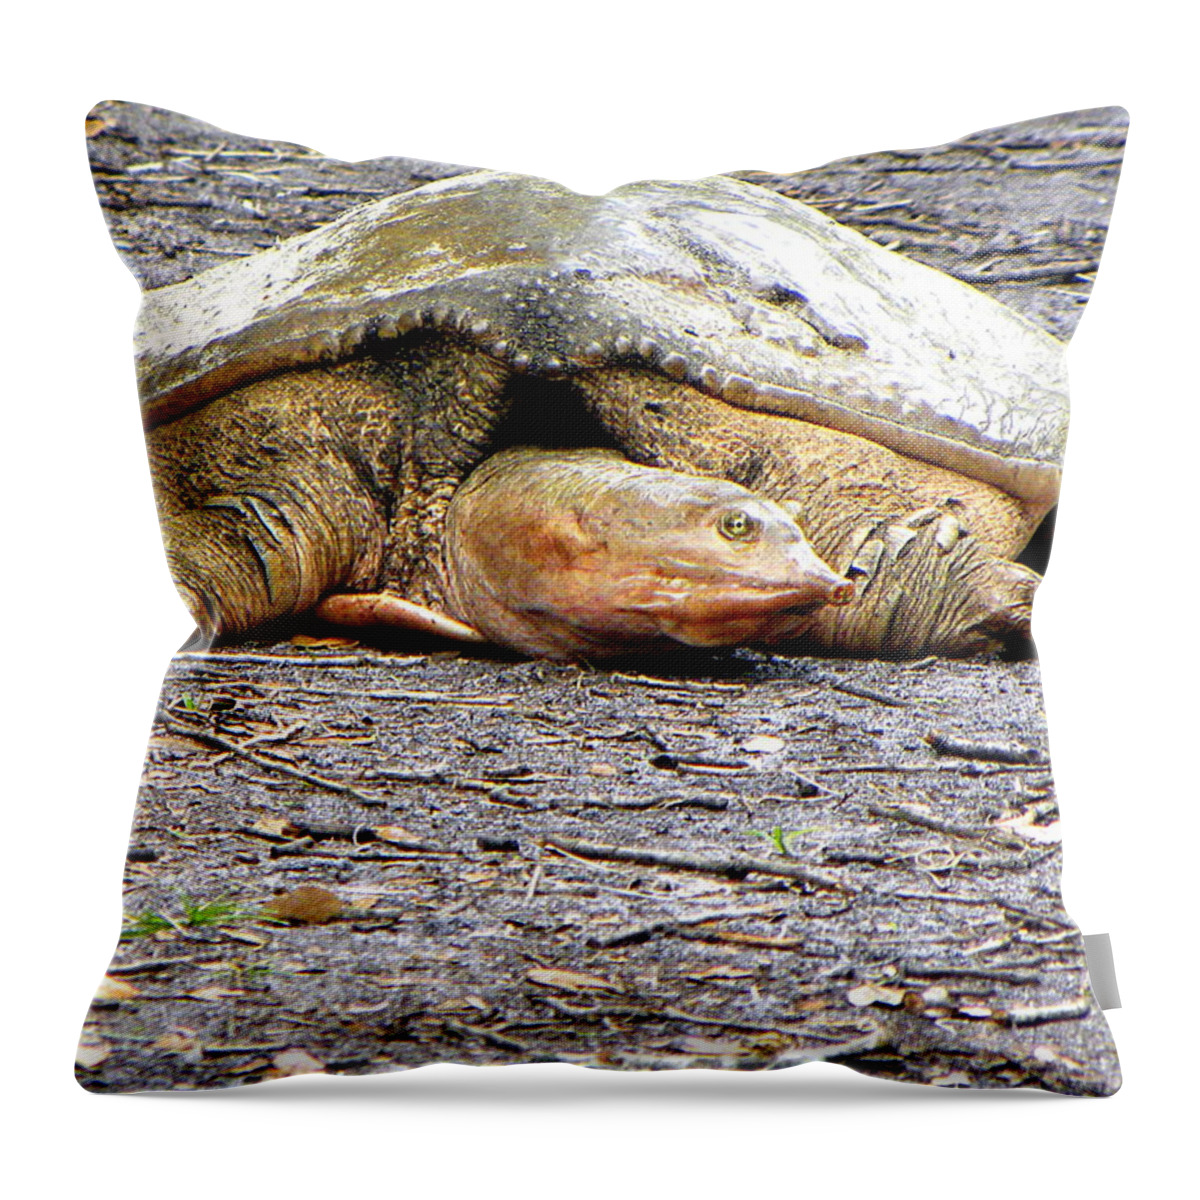 Turtle Throw Pillow featuring the photograph Florida Softshell Turtle 000 by Christopher Mercer